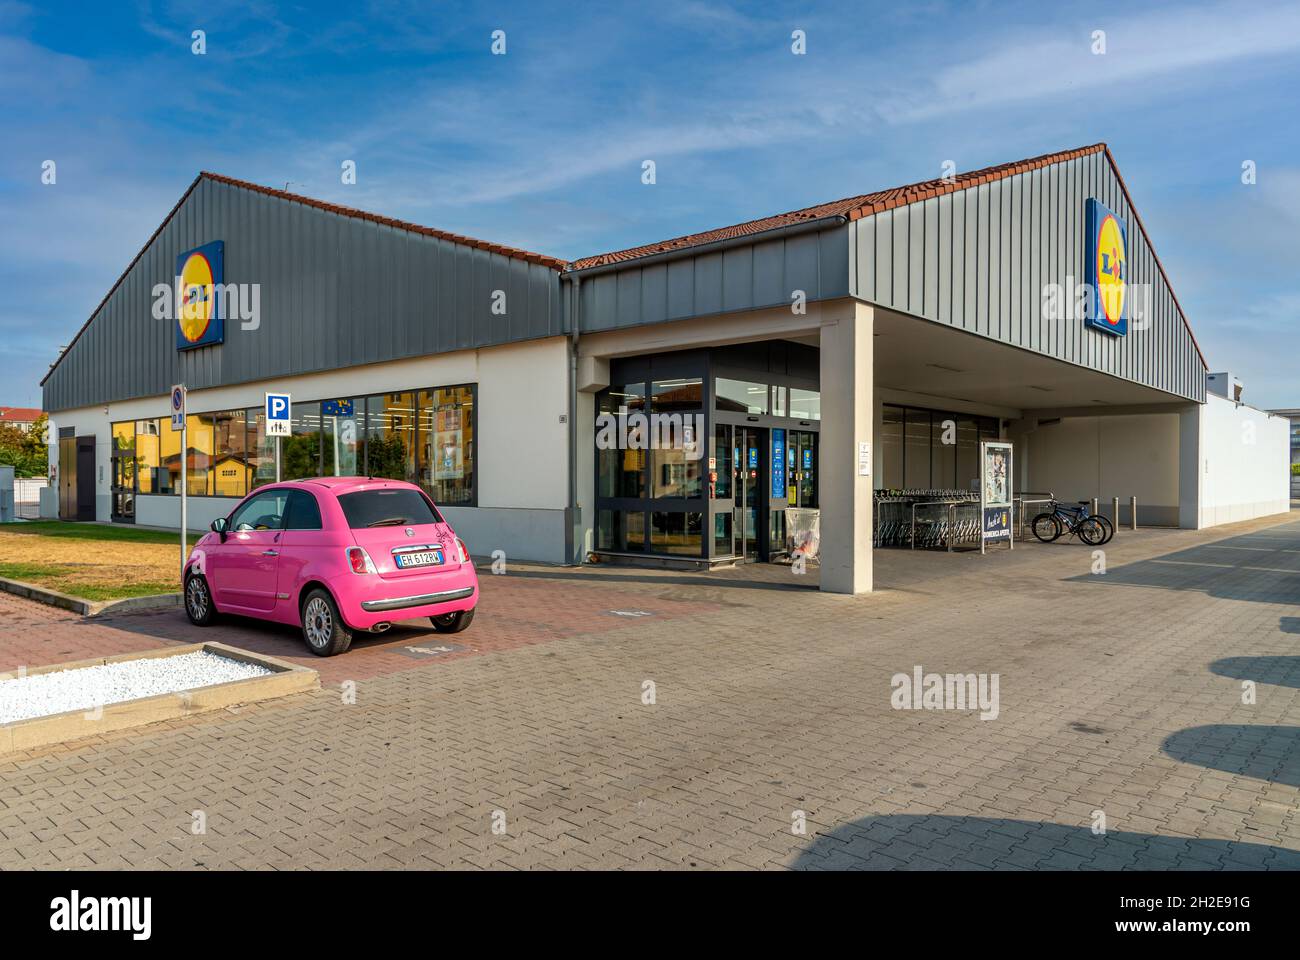 Fossano, Cuneo, Italy - September 9, 2021: LIDL supermarket with pink 500 FIAT car in the parking lot, Lidl Stiftung & Co. KG Stock Photo